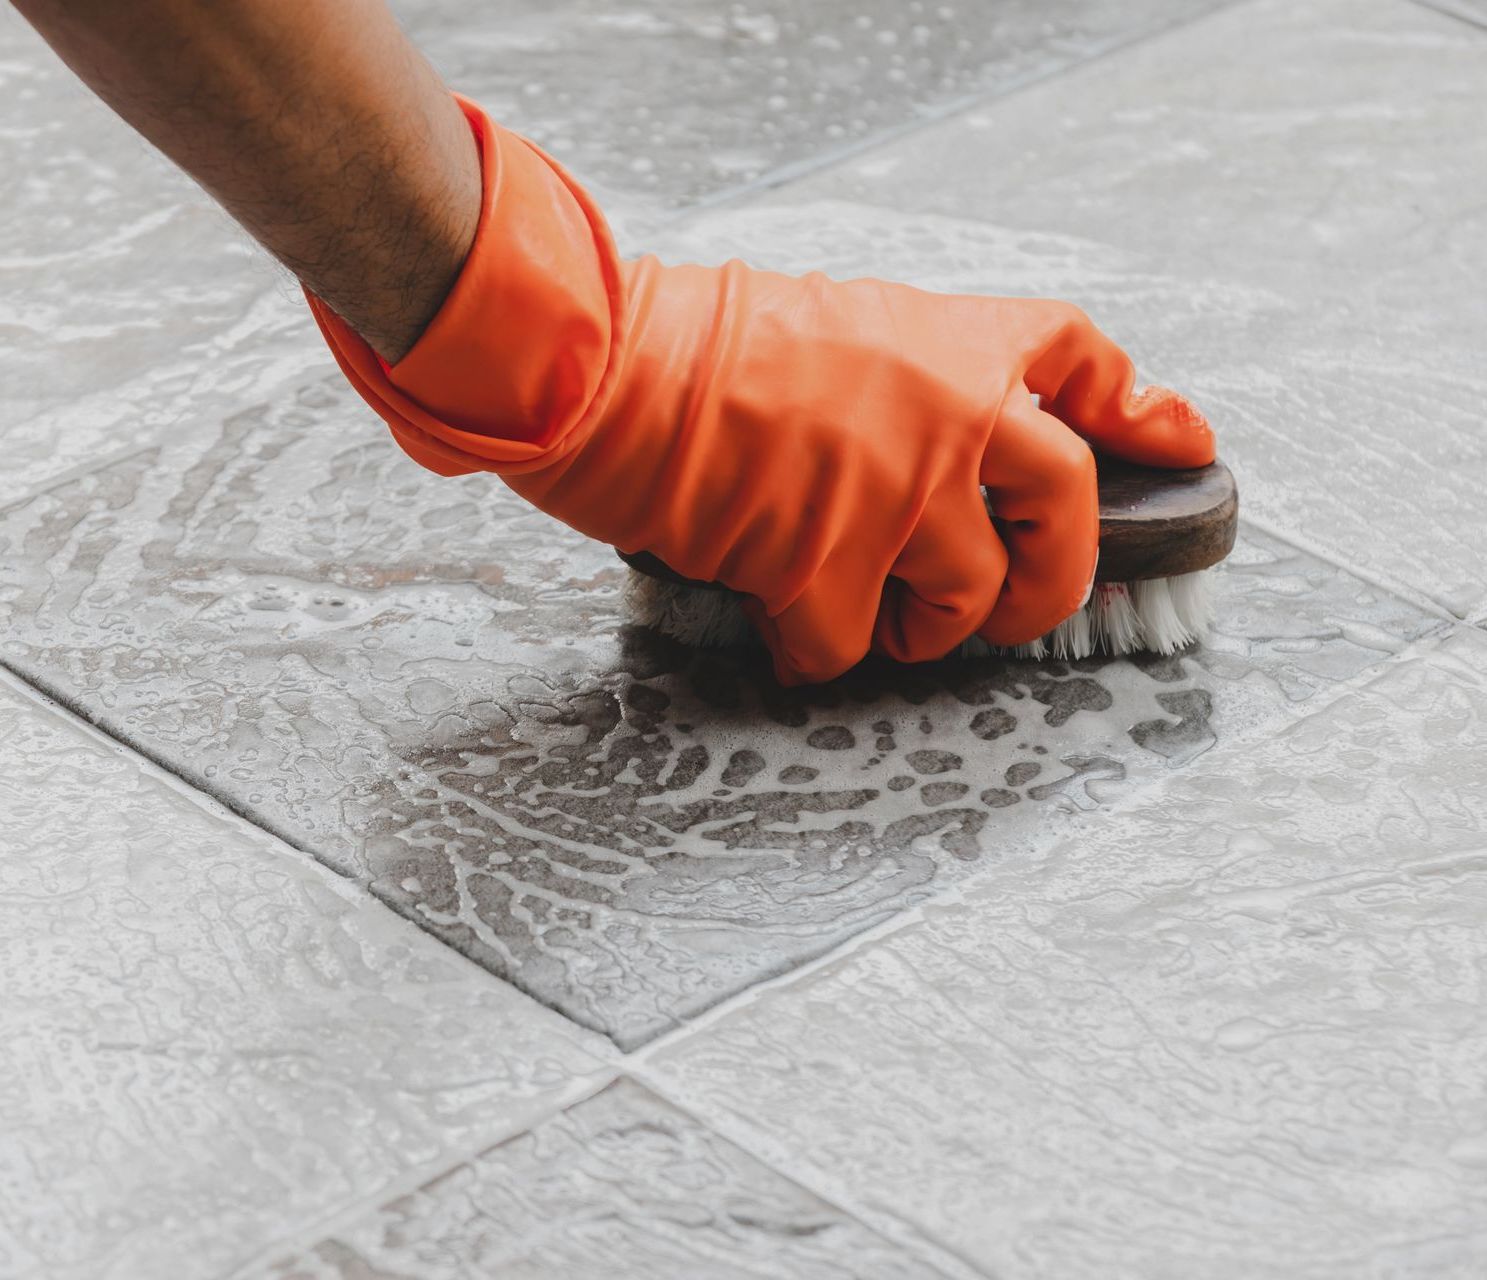 a person wearing orange gloves is cleaning a tile floor with a brush